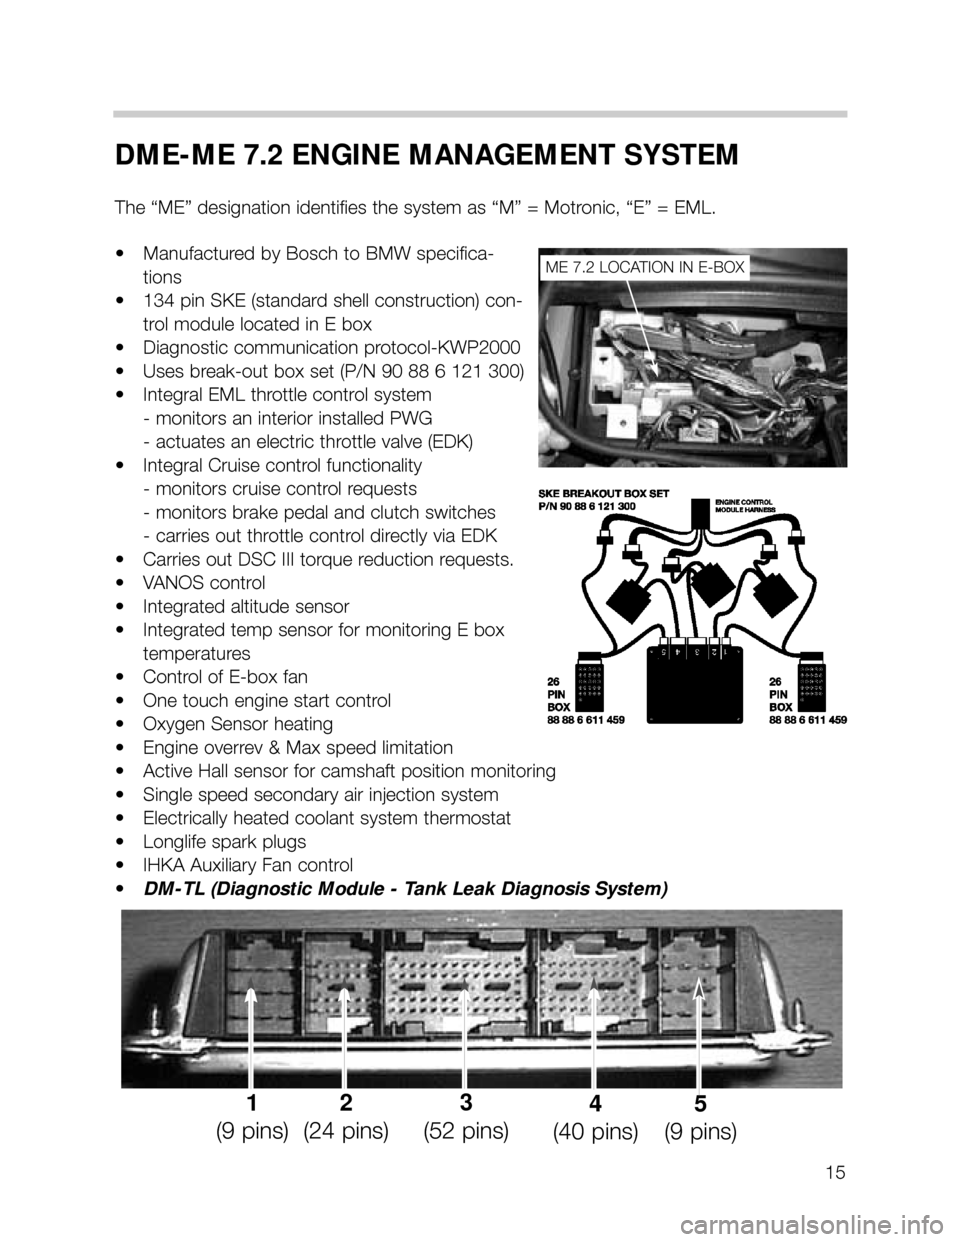 BMW X5 2006 E53 M62TU Engine Workshop Manual 15
DME-ME 7.2 ENGINE MANAGEMENT SYSTEM
The “ME” designation identifies the system as “M” = Motronic, “E” = EML.
• Manufactured by Bosch to BMW specifica-
tions
• 134 pin SKE (standard 